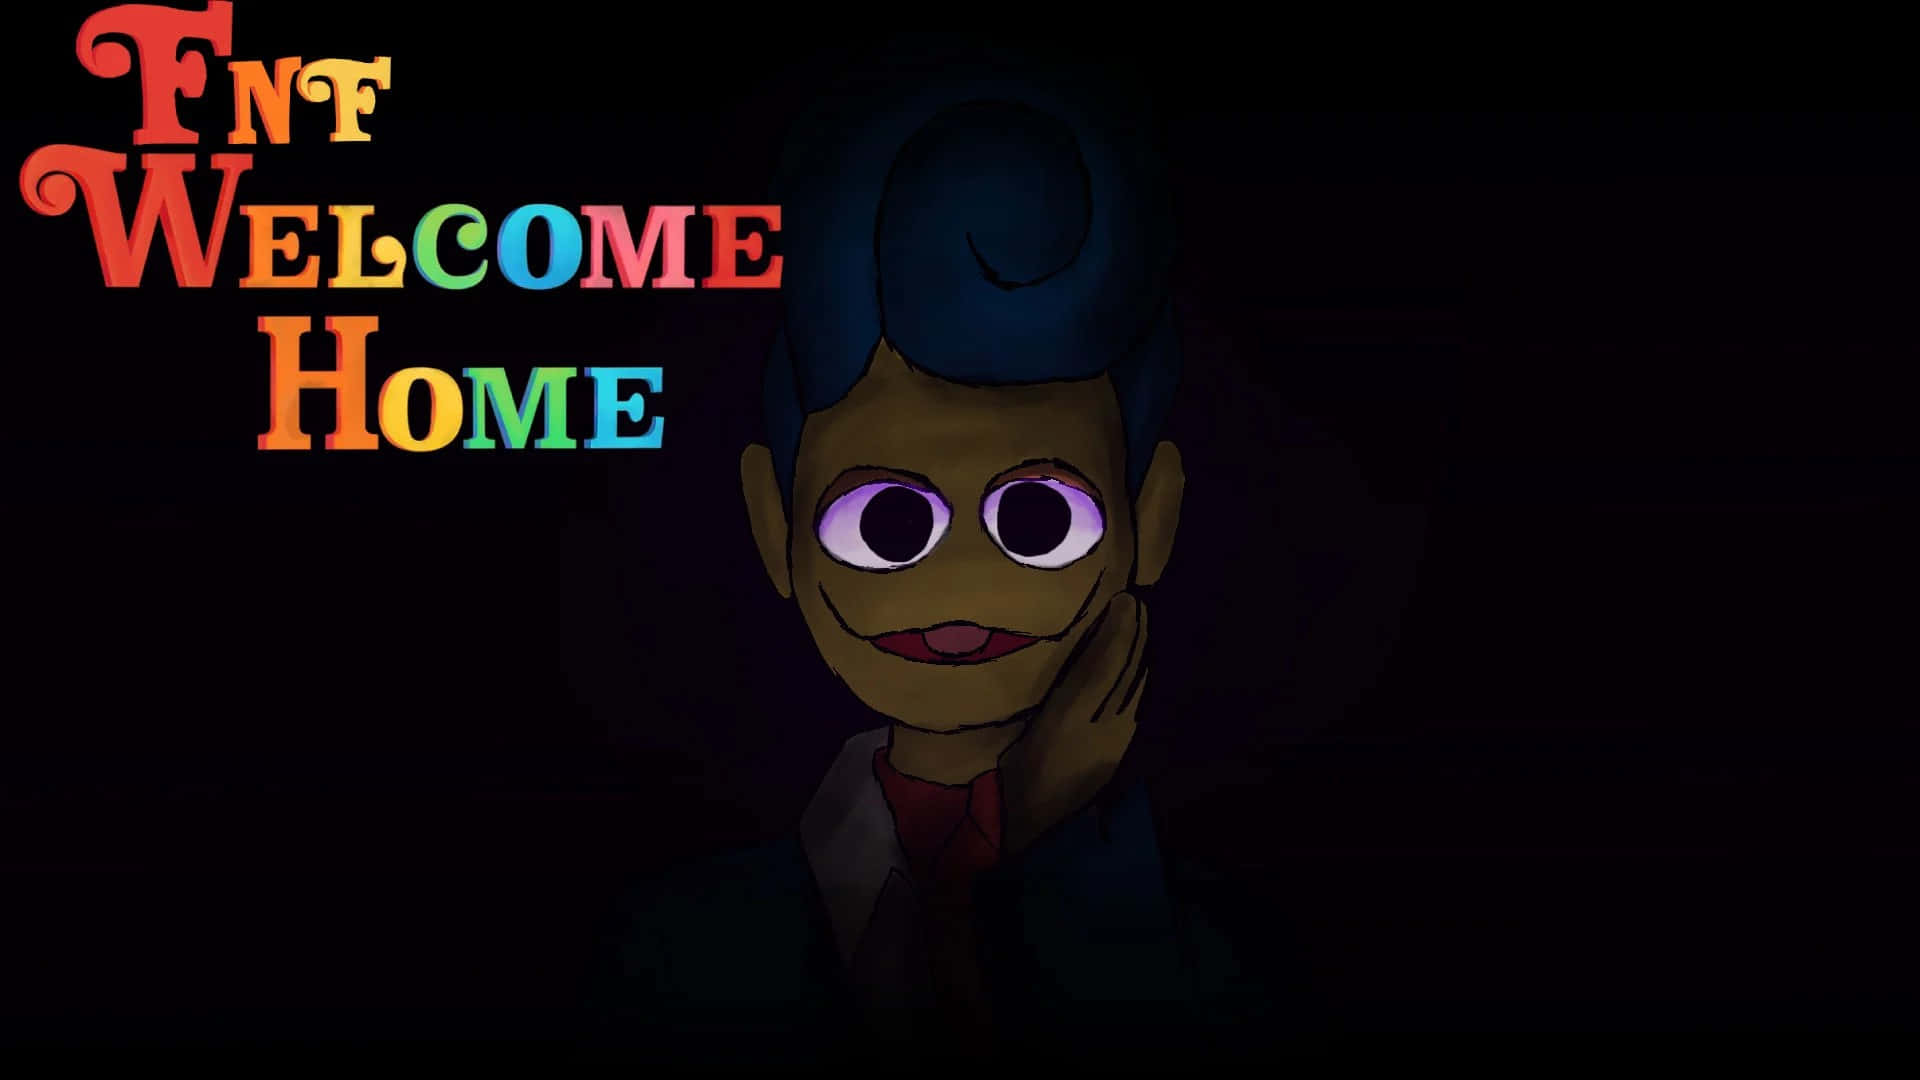 Fn F Welcome Home Character Greeting Wallpaper